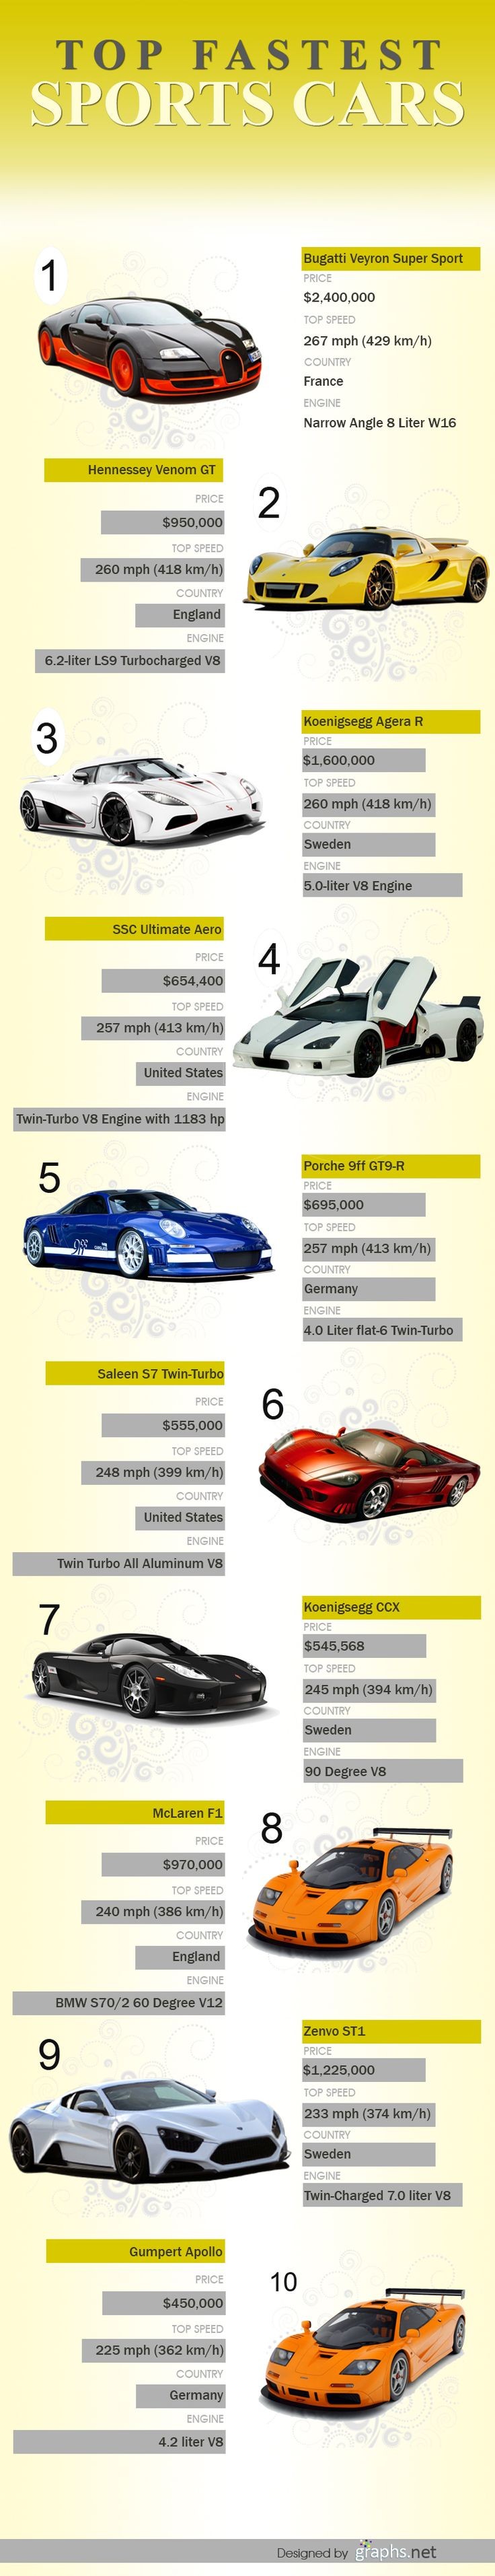 Top 10 Fastest Sports Cars.... Some of these are a...